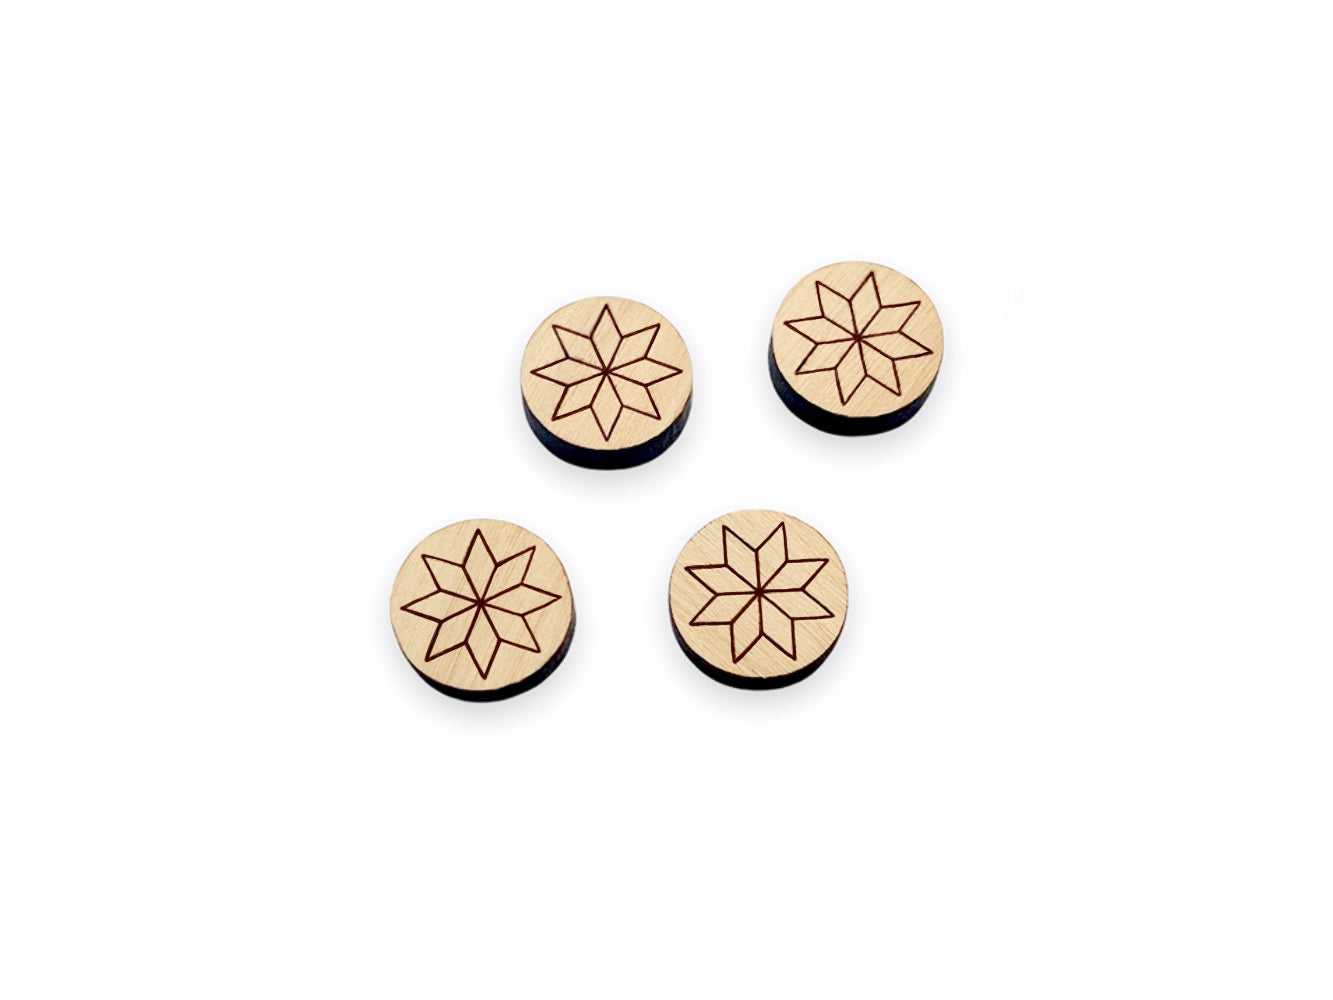 two pairs of round wooden cabochon stud earring blanks engraved with a quilted star design